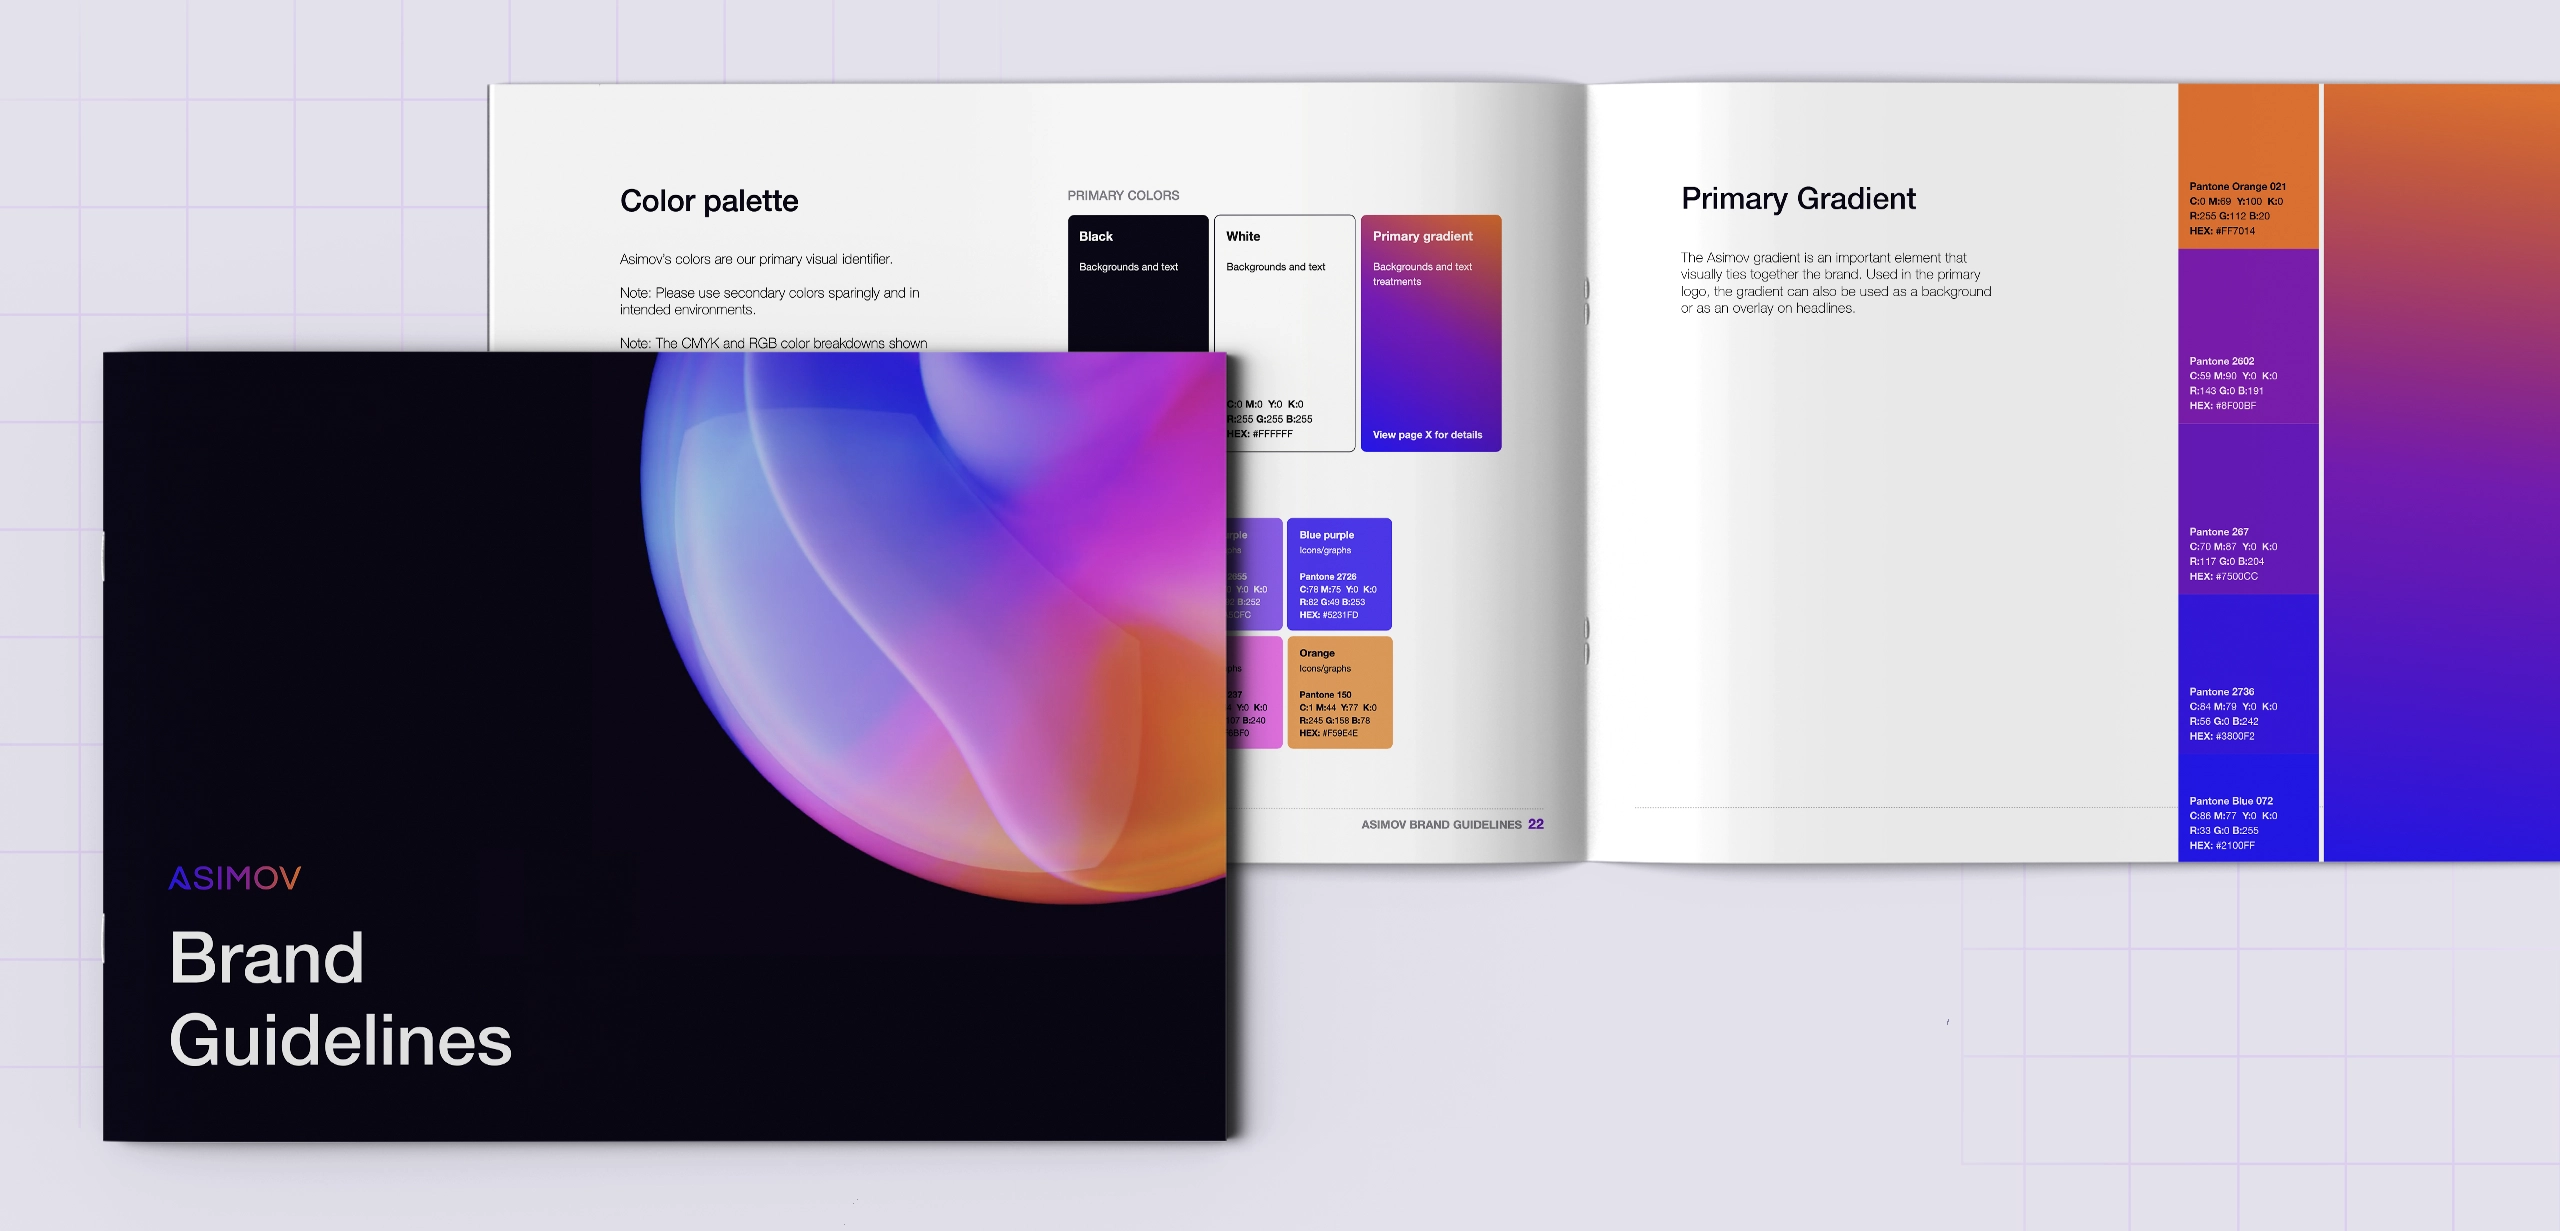 Genetic science company brand guidelines.